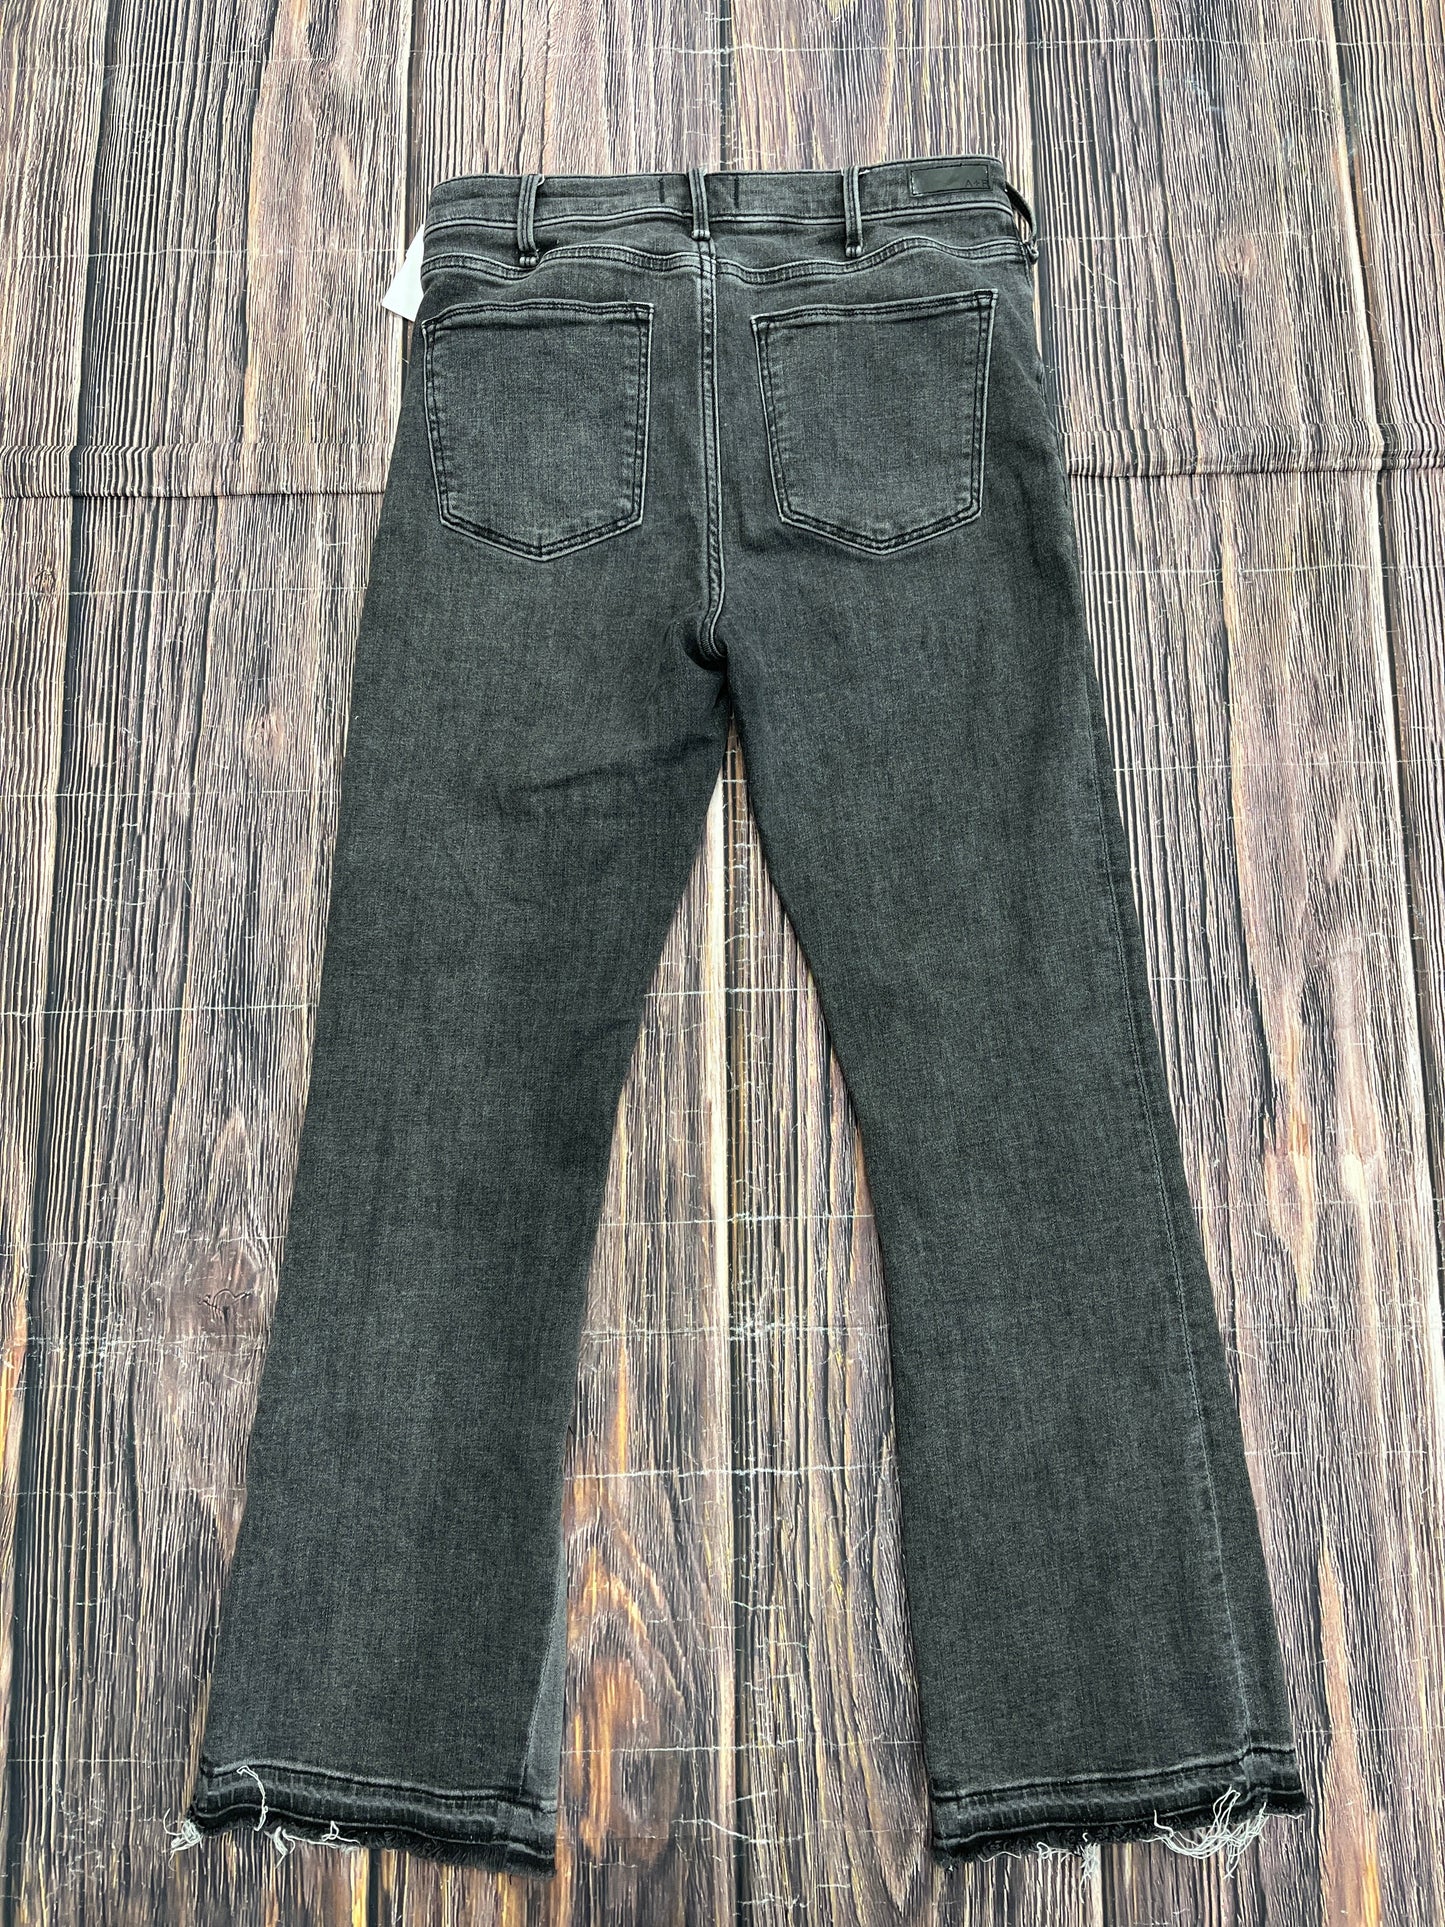 Jeans Flared By Abercrombie And Fitch  Size: 6long